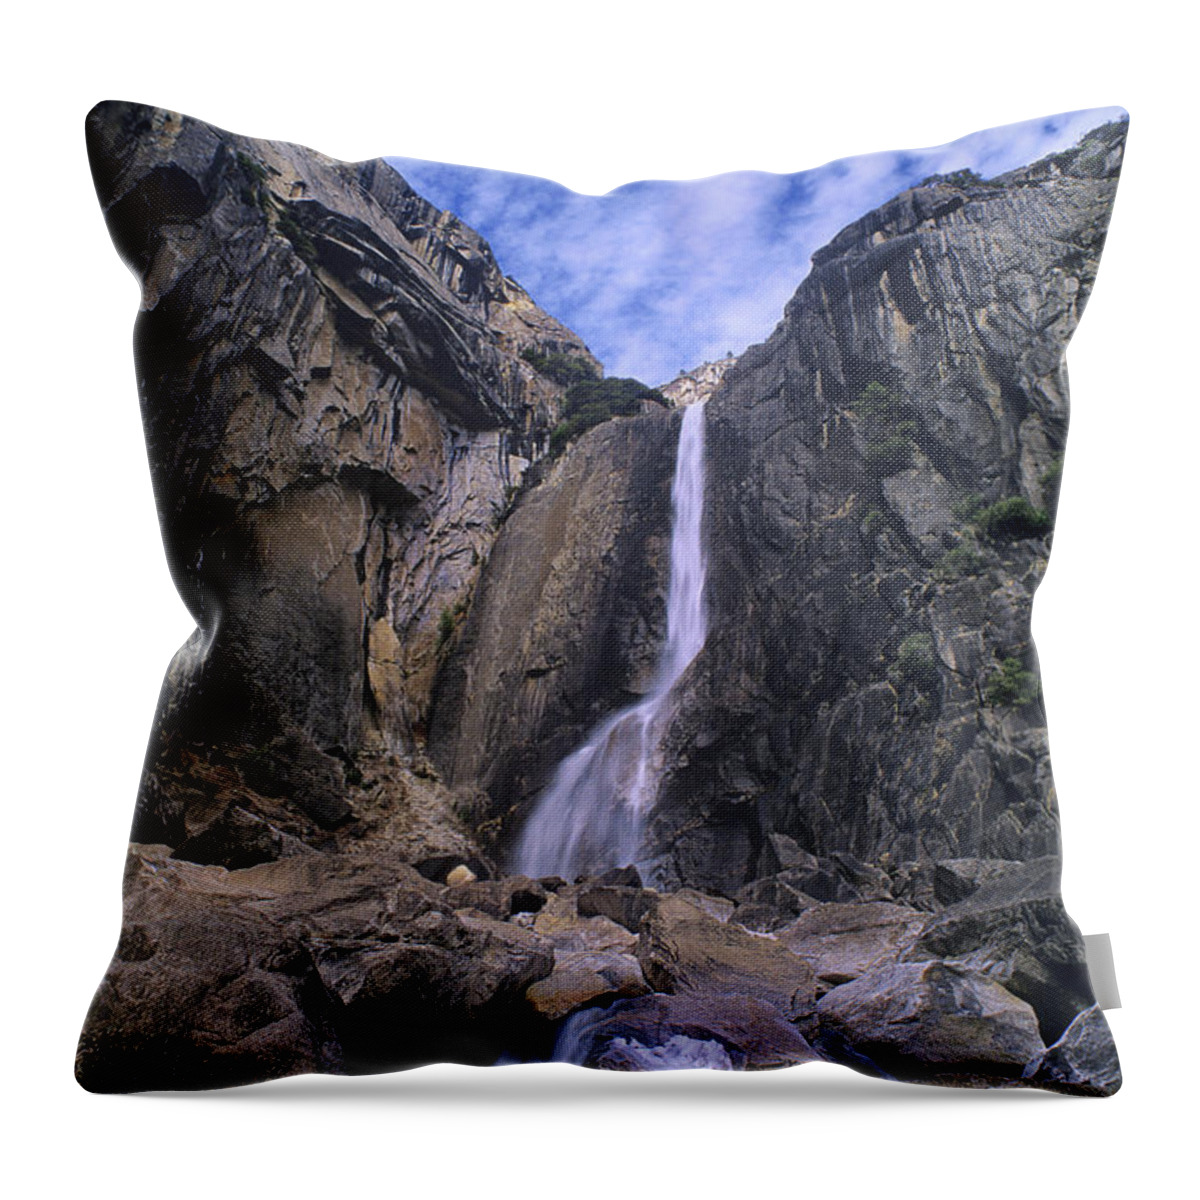 Dave Welling Throw Pillow featuring the photograph Lower Falls Yosemite National Park California by Dave Welling